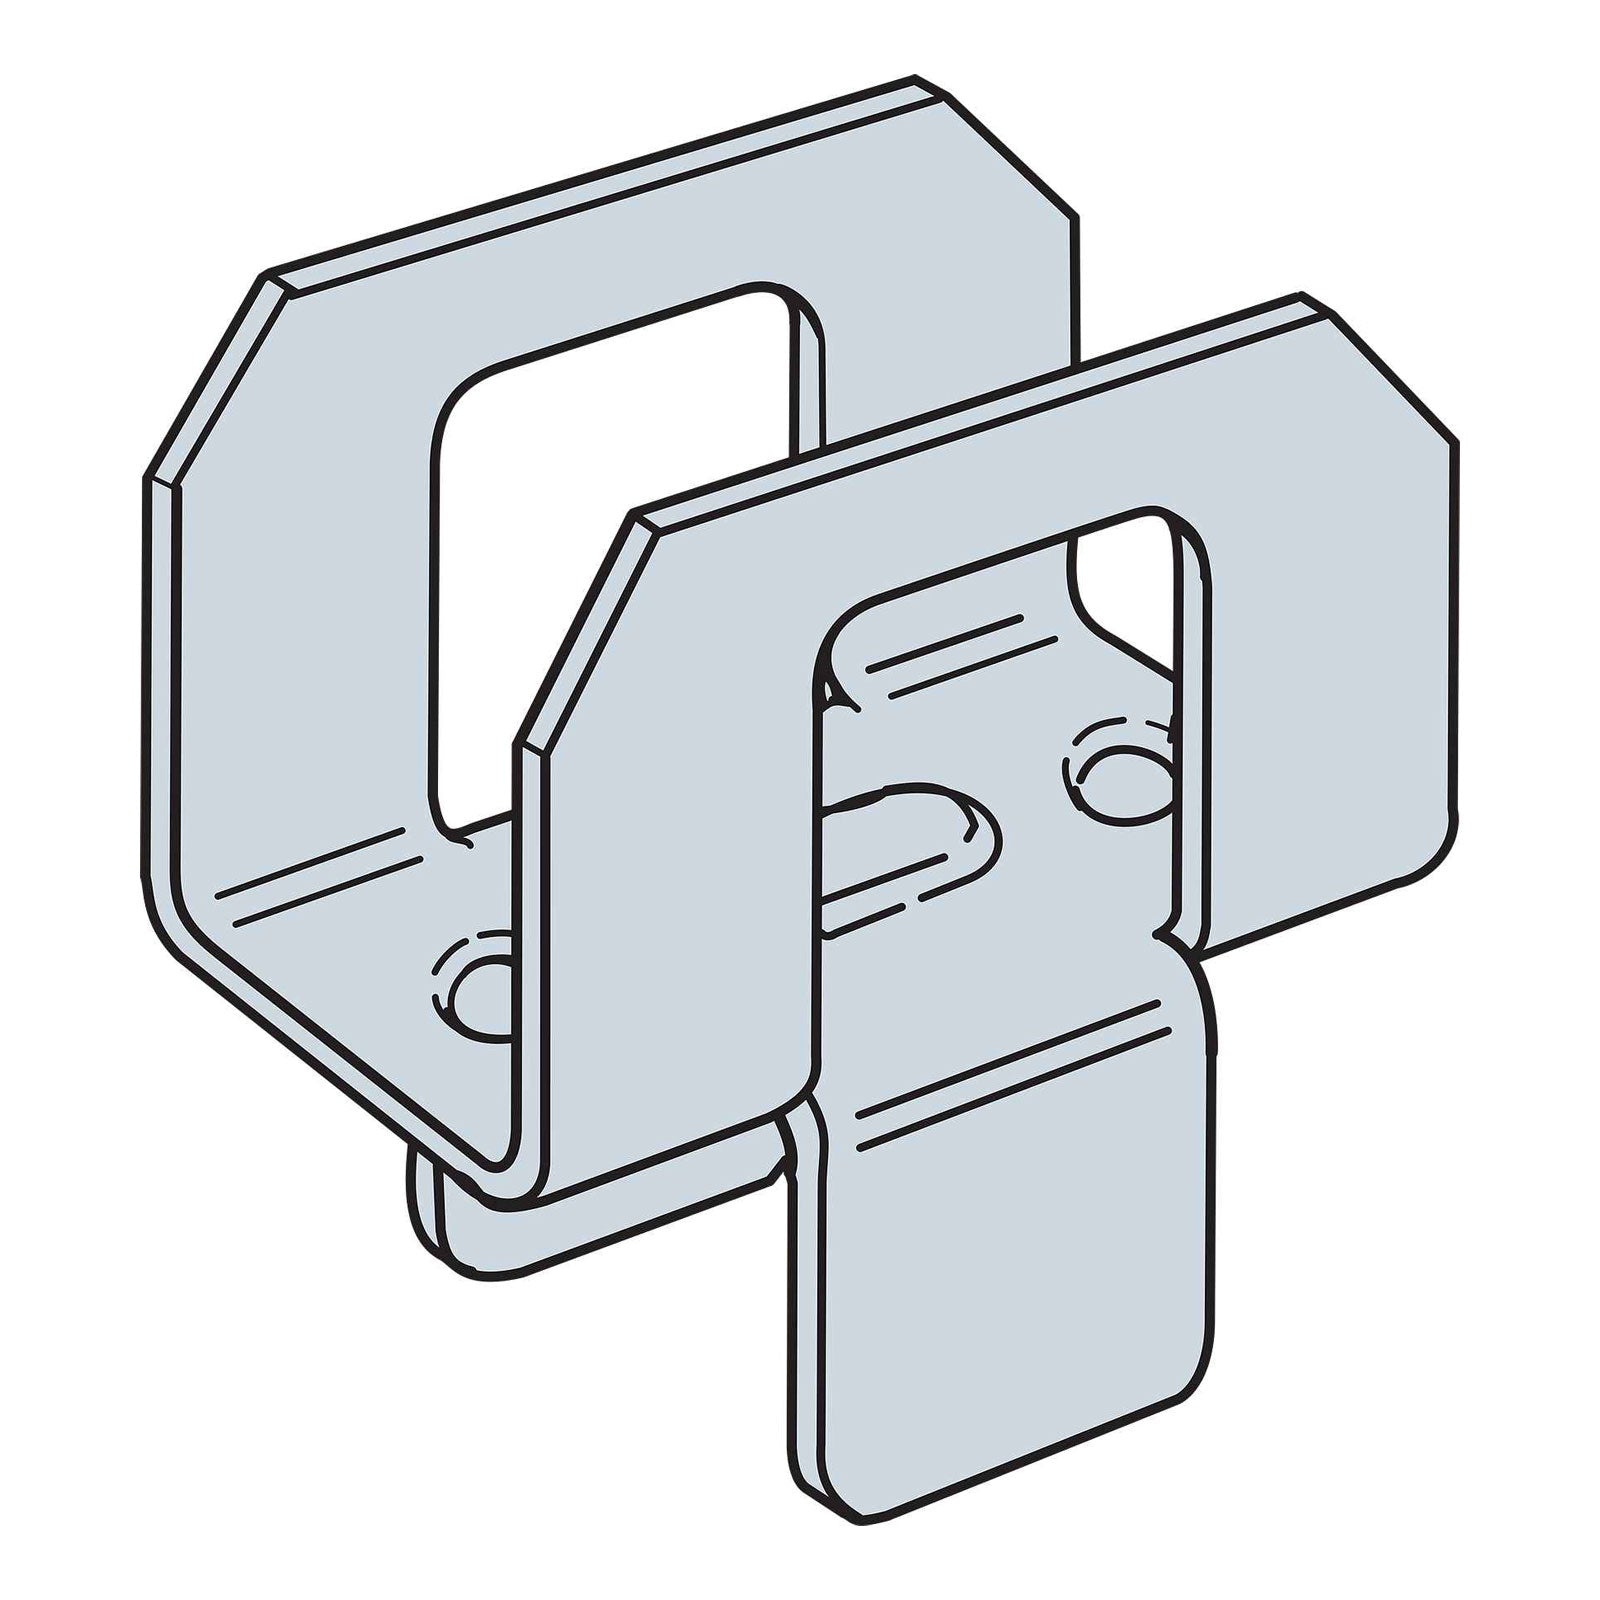 Simpson PSCL 3/8 - 3/8" Plywood Sheathing Clips Illustration